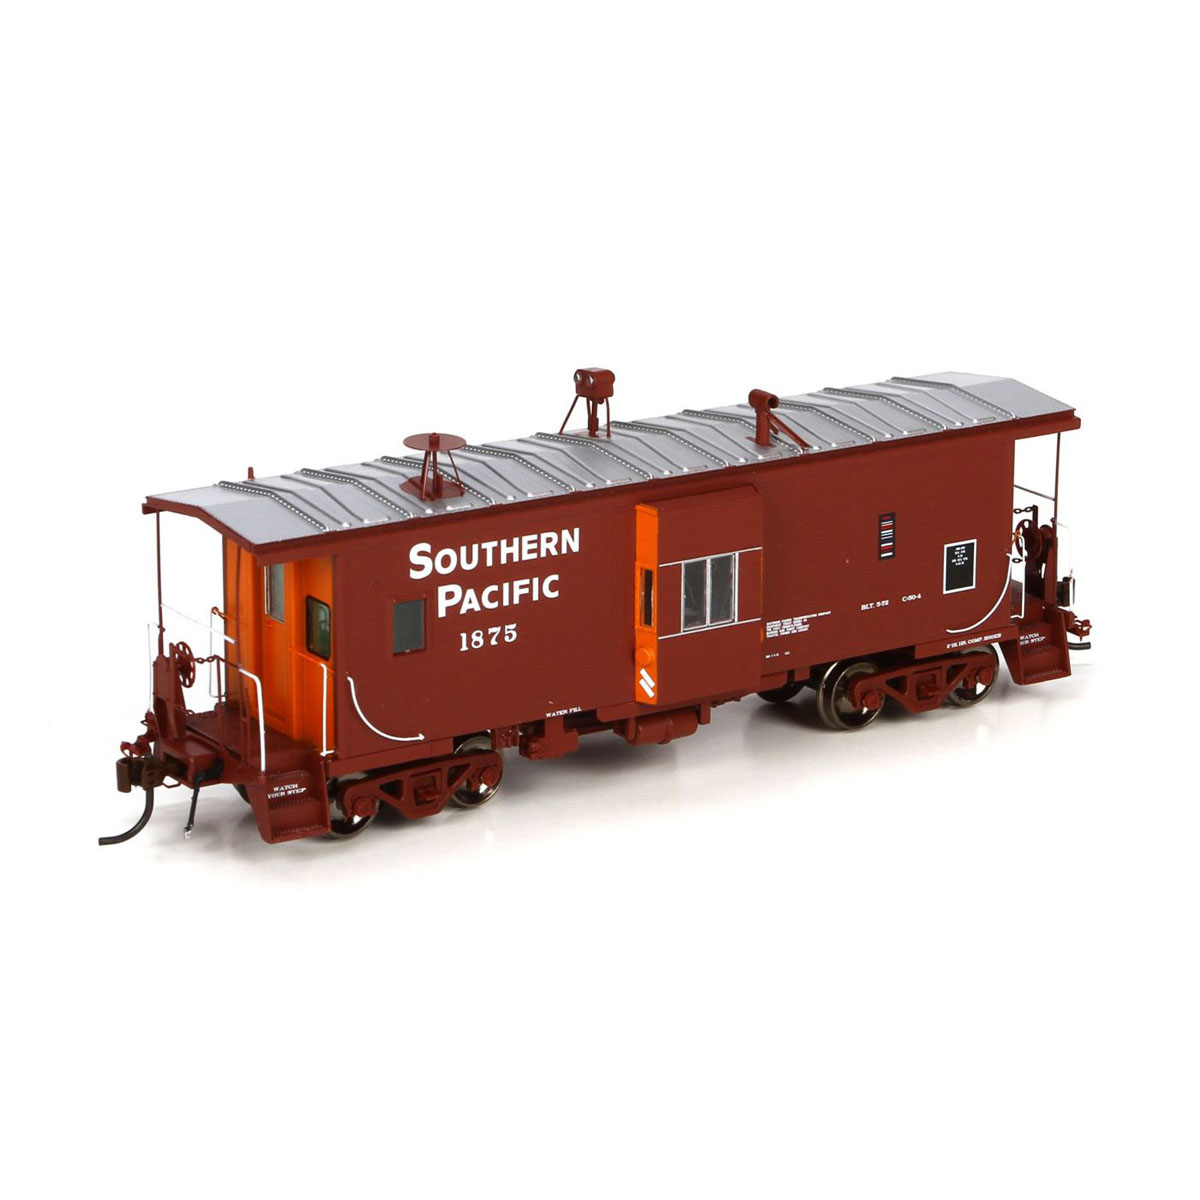 #1974 Details about   Athearn #23127 N scale “Southern Pacific” bay window caboose  Rd 